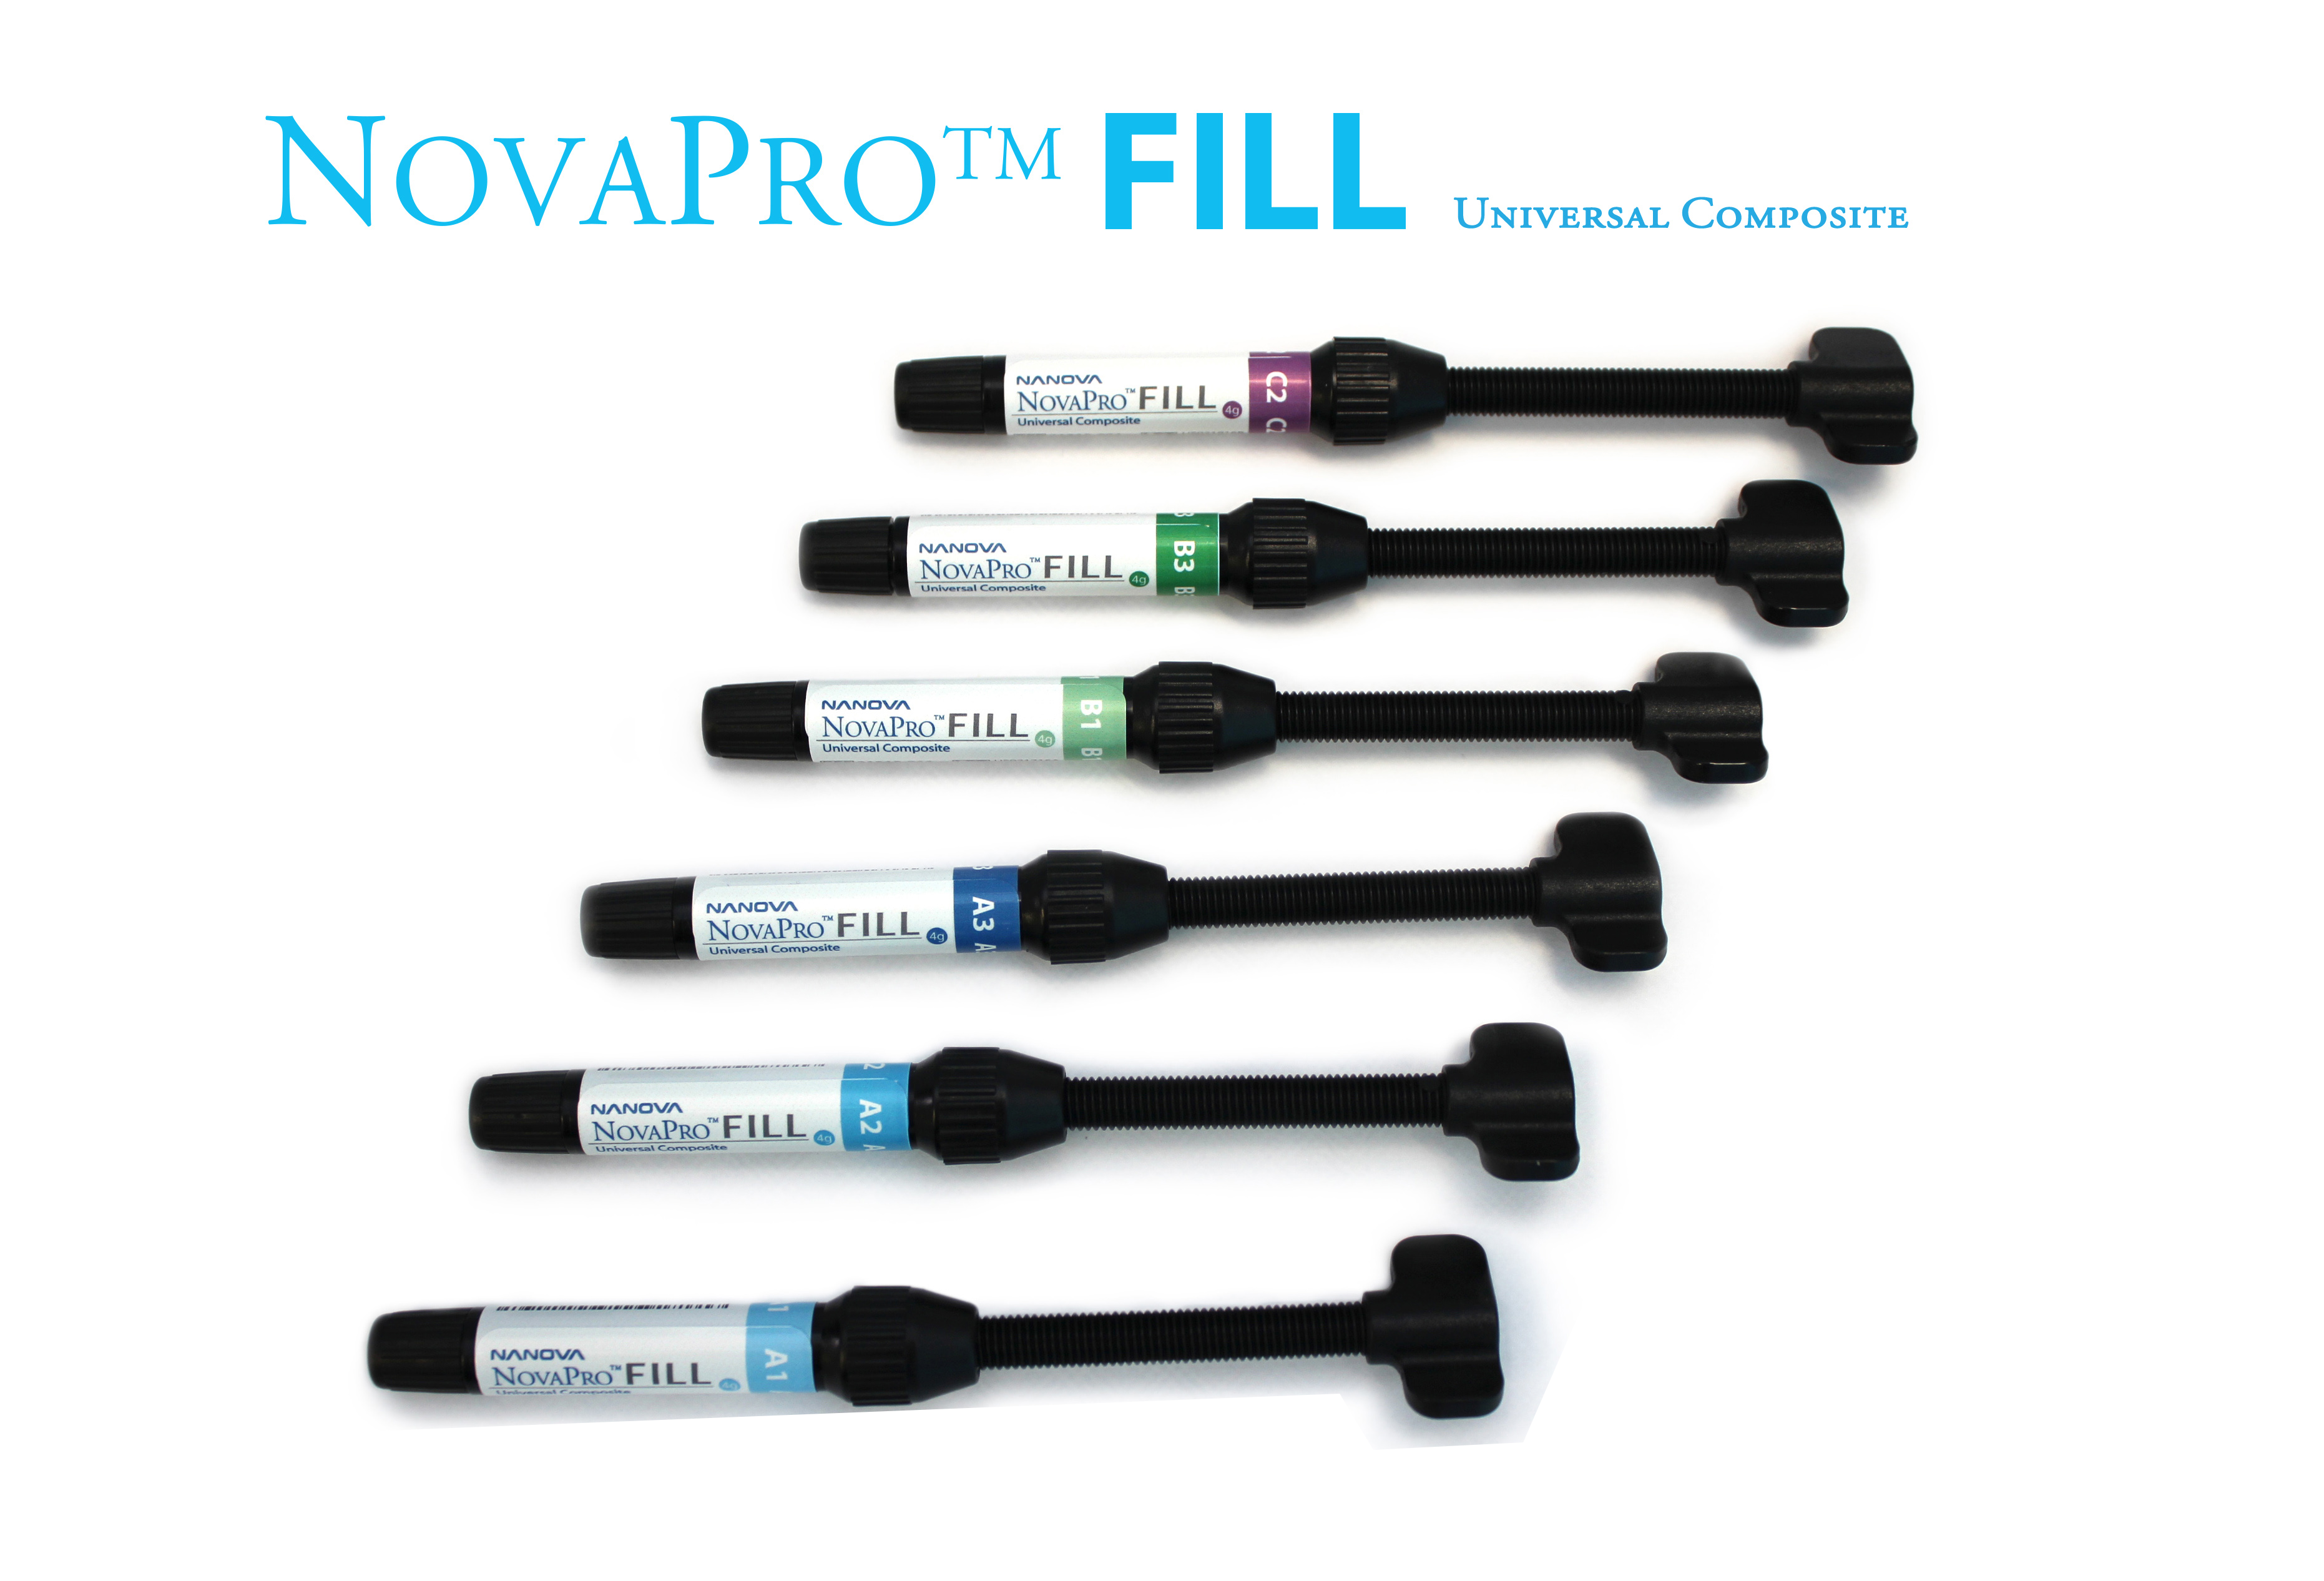 NovaPro™ universal composites incorporate patented nanofiber technology, in conjunction with nanoparticles, for maximum strength, and limited flaws. The texture with superior flexural and comprehensive strengths has a excellent handling properties and high strain resistance. It requires less water absorption due to high percentage of material cured. There are several shades you can select to match your patients teeth. 